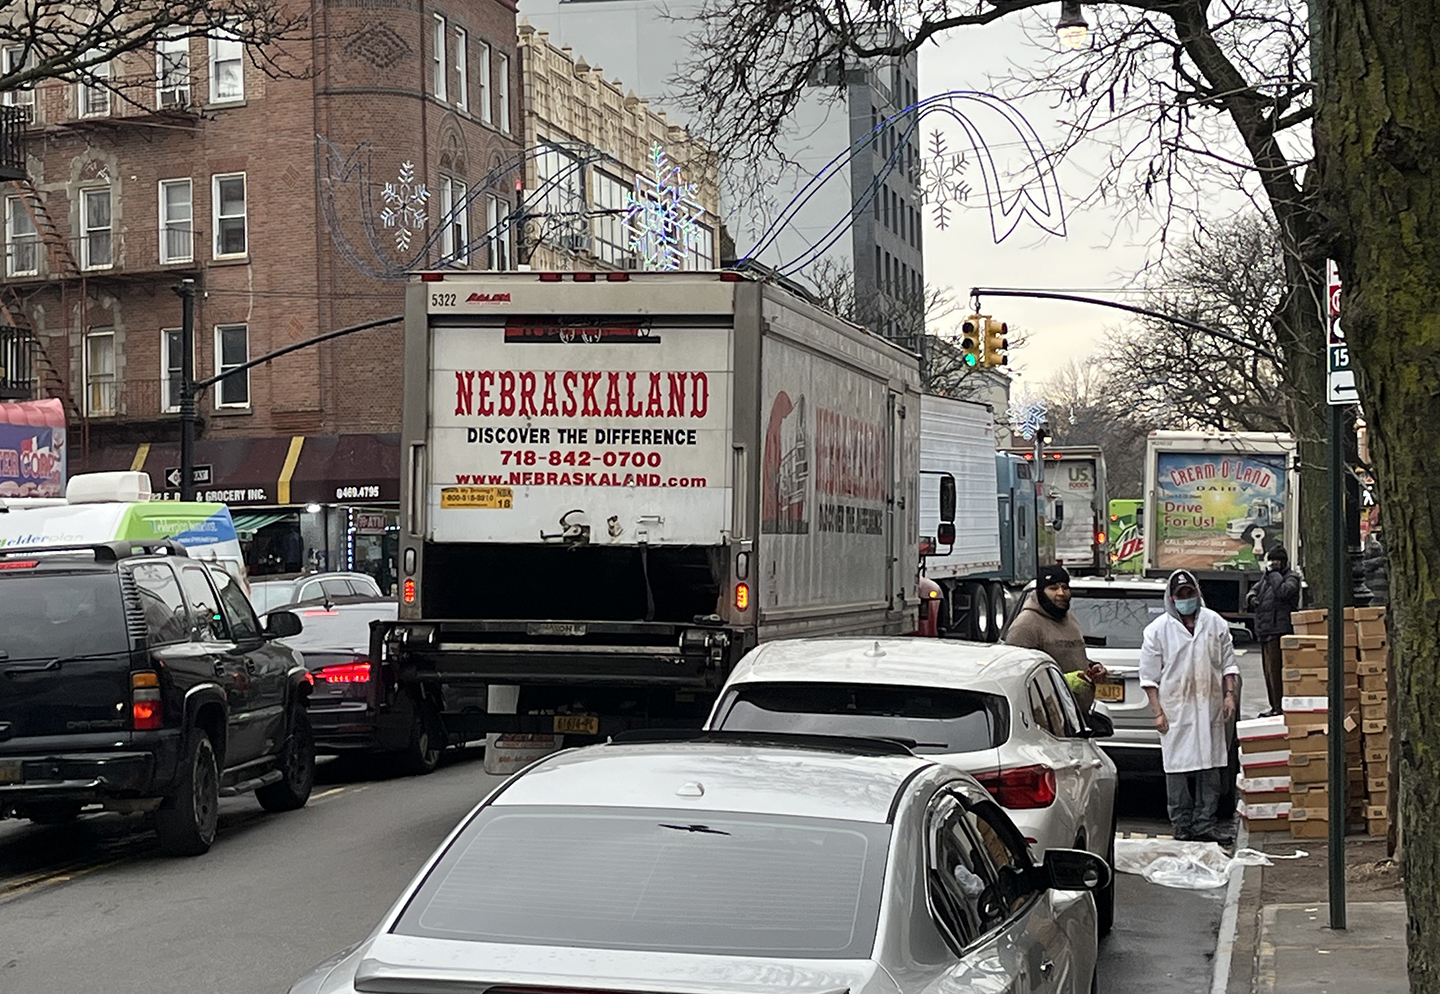 Men unload groceries from a double-parked truck, while cars squeeze around on the wrong side of the street. Futher down the street, only trucks are visible, including a tractor-trailer that appears to be having trouble getting through.